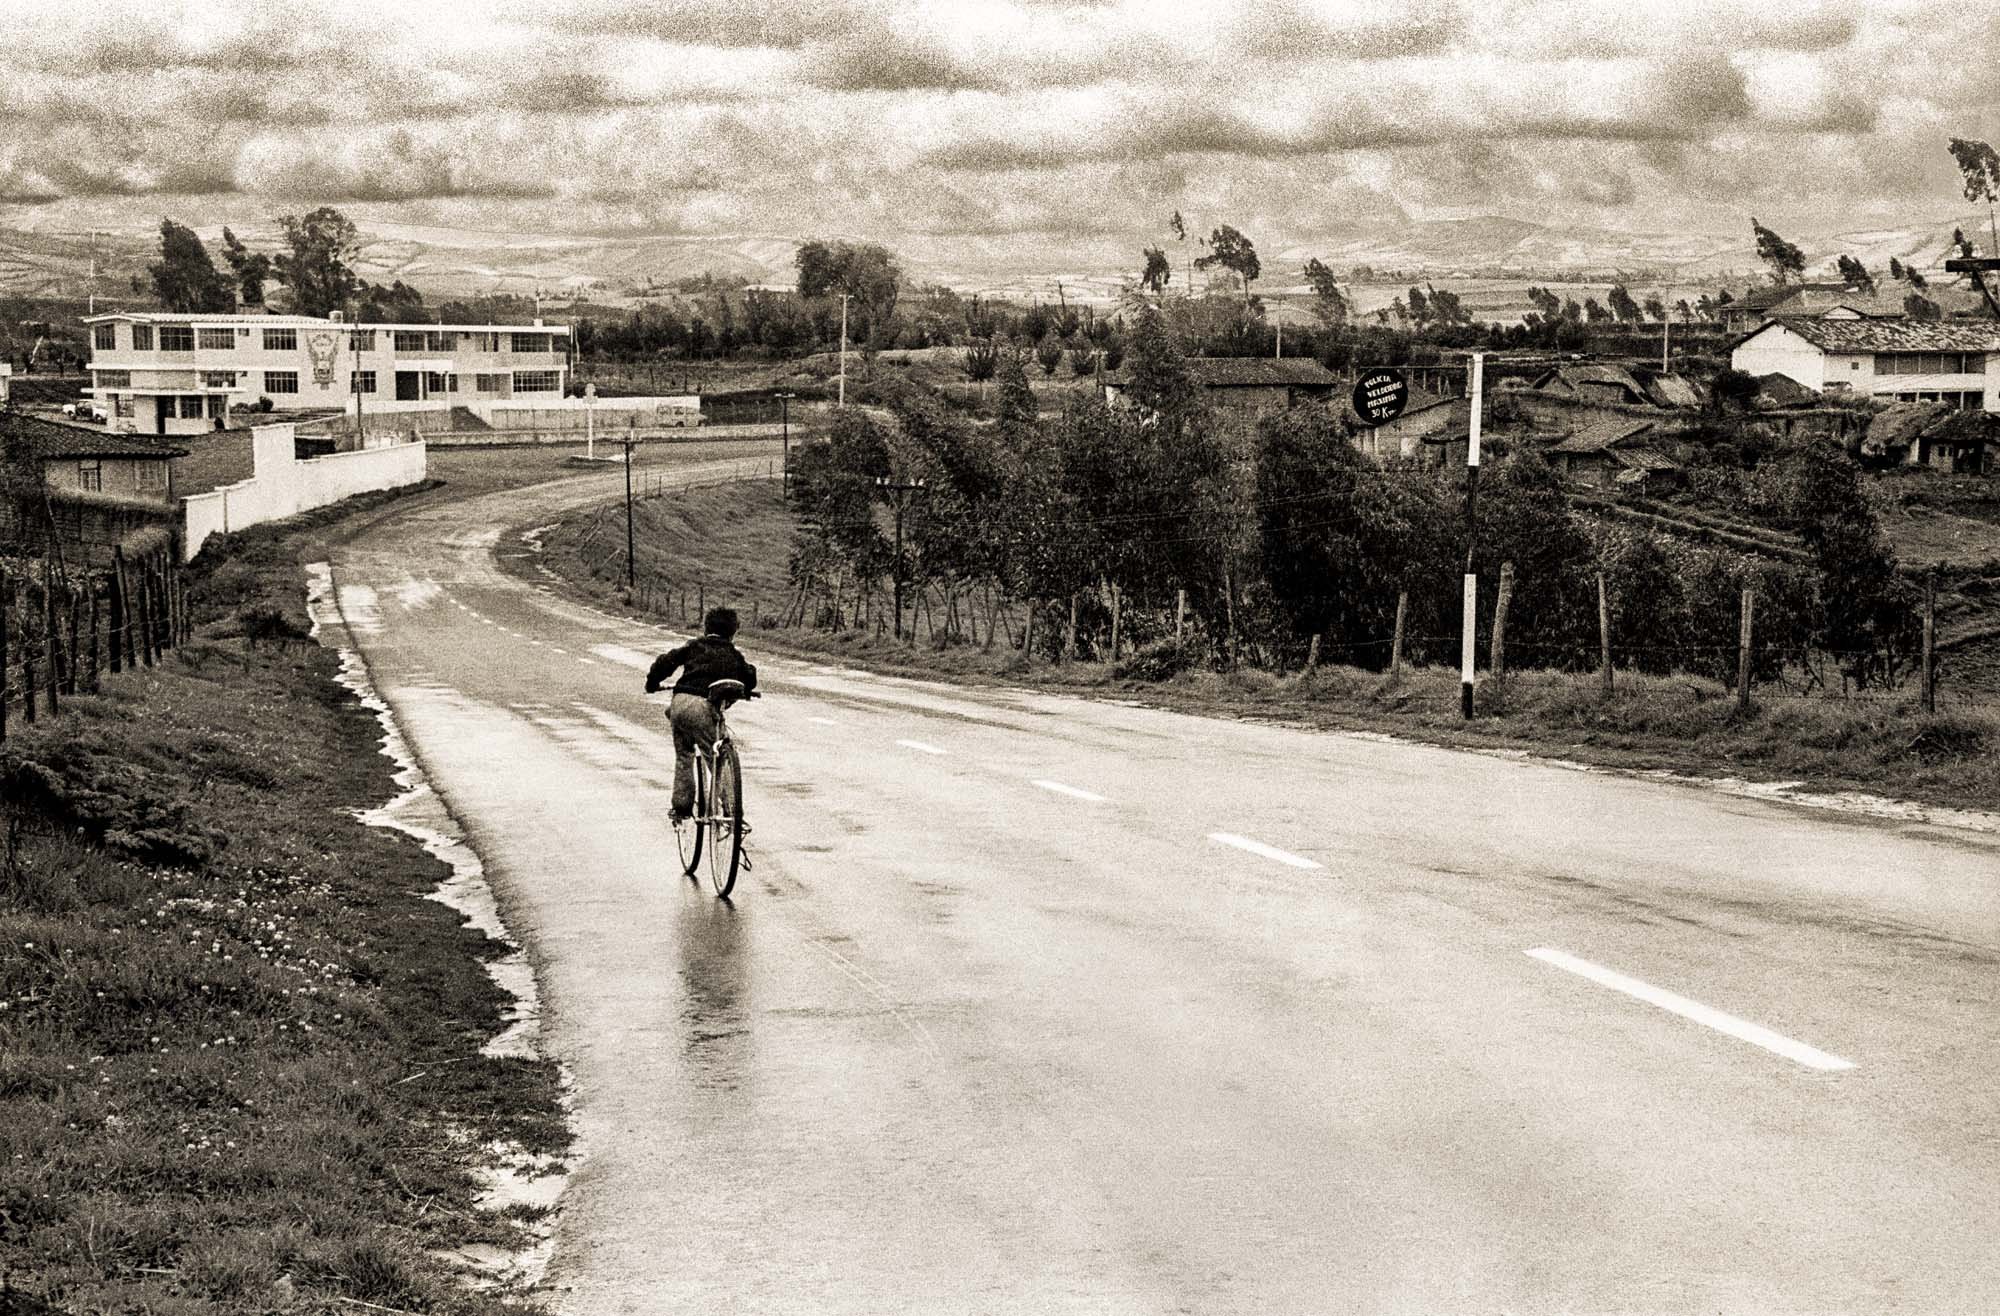 Bicycling Boy on Wet Road